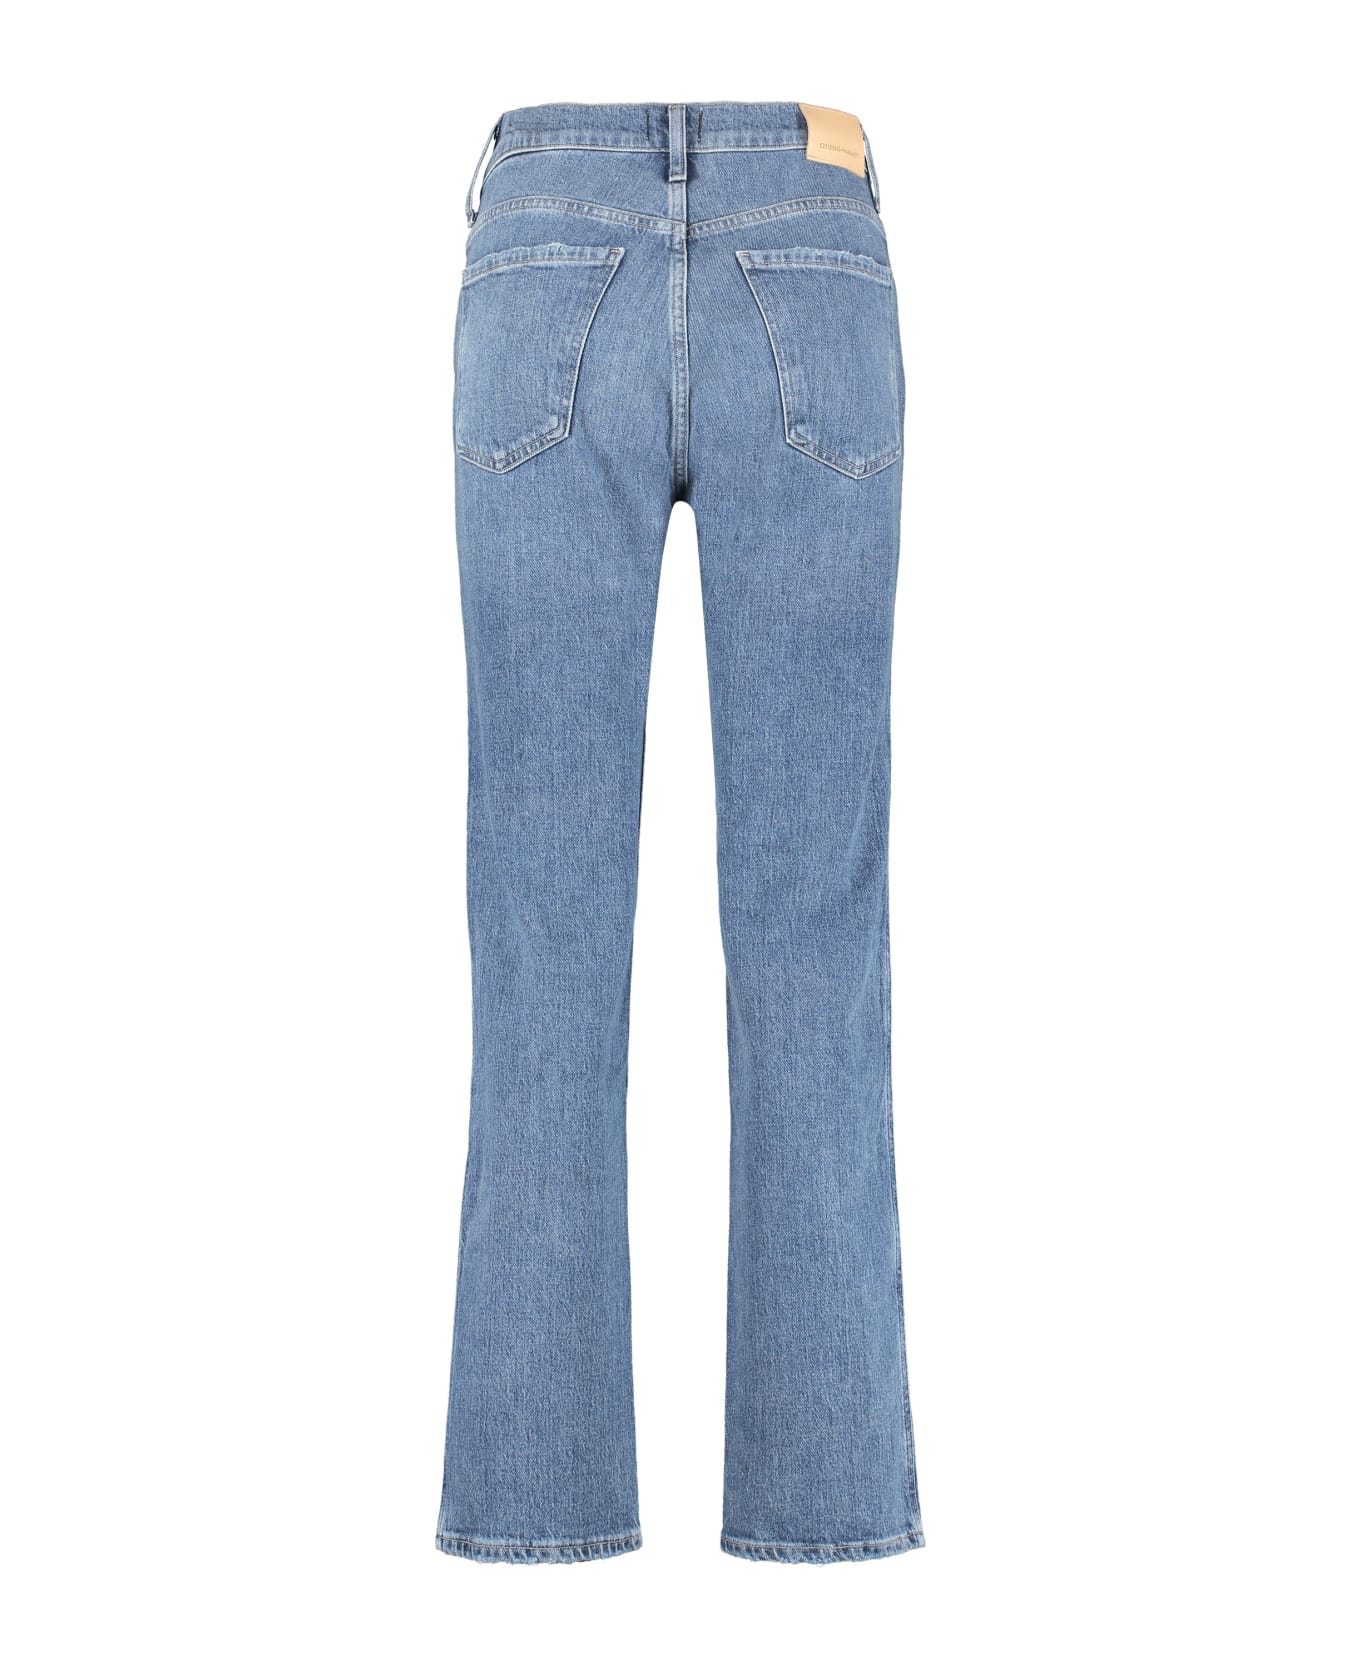 Citizens of Humanity Daphne Stovepipe Jeans - Denim デニム